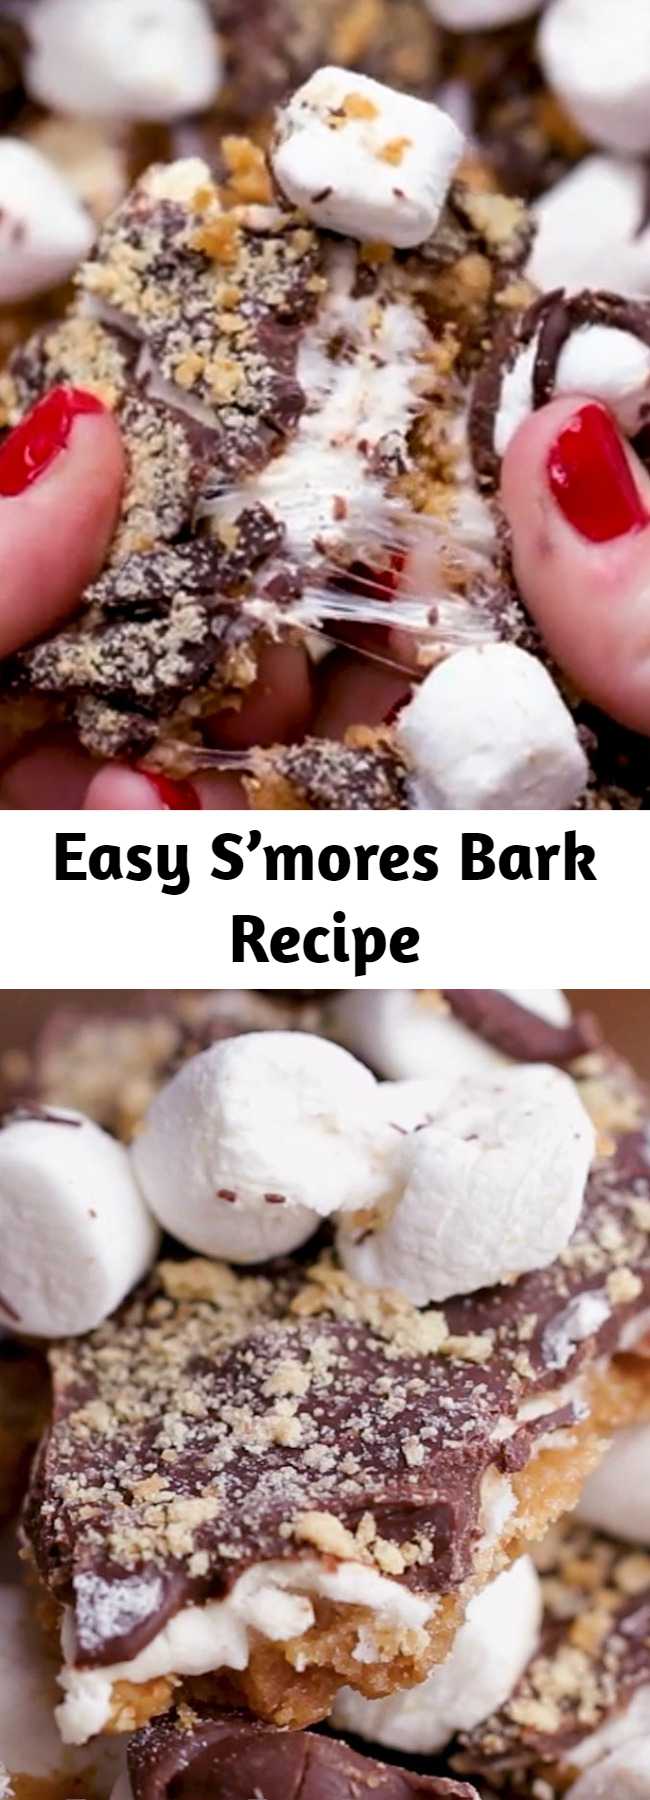 Easy S’mores Bark Recipe - This was a huge hit! It’s an great gif! You can really personalize it with crushed nuts or drizzled chocolate on top.